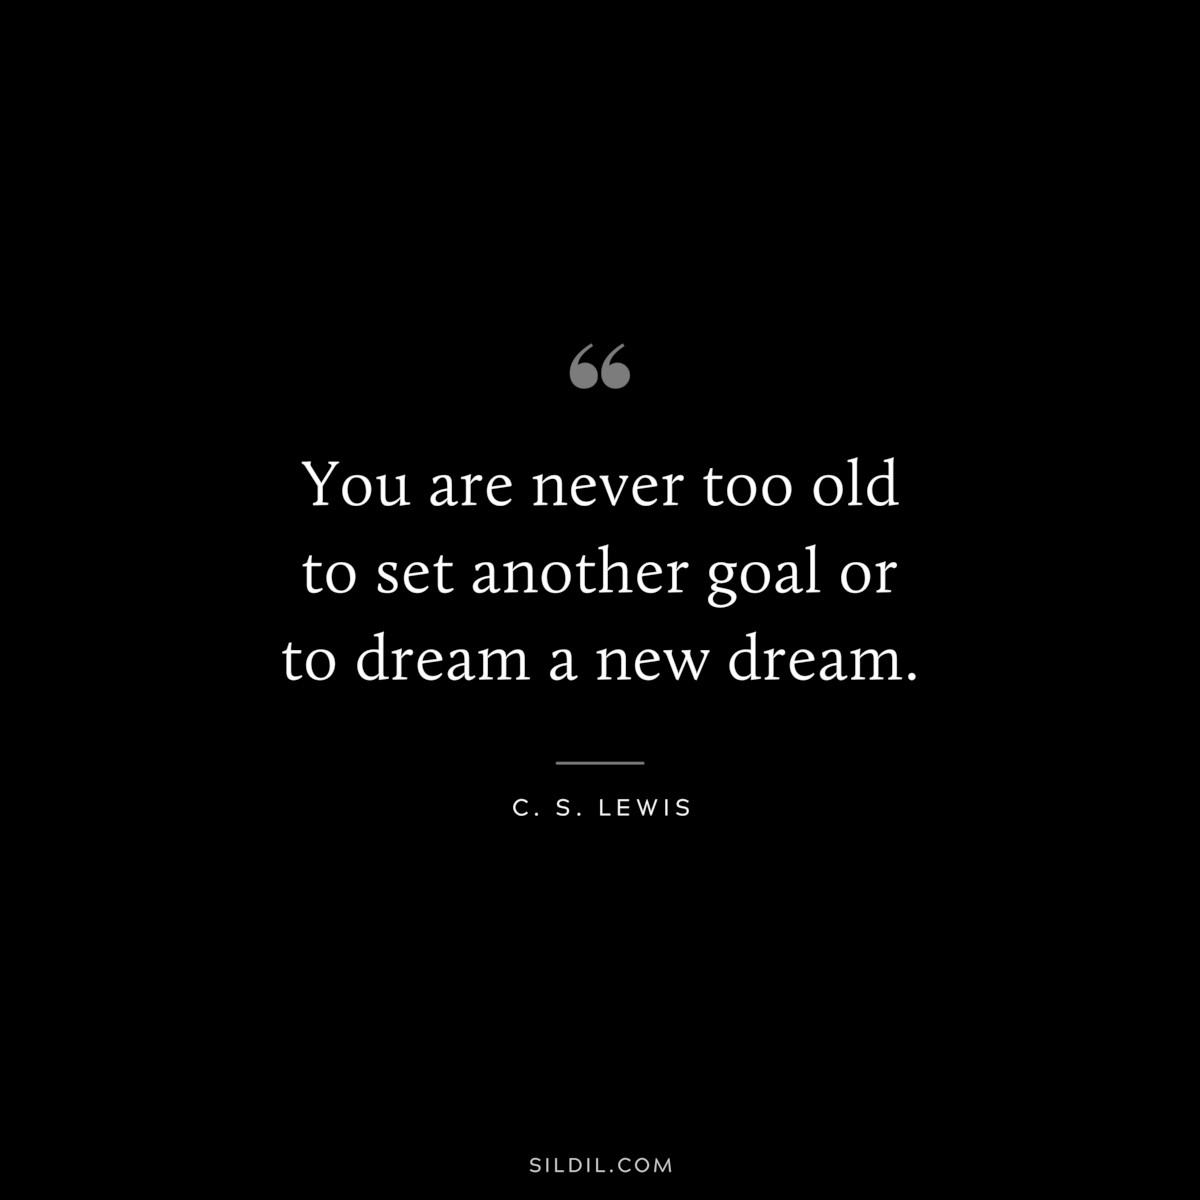 You are never too old to set another goal or to dream a new dream. ― C. S. Lewis